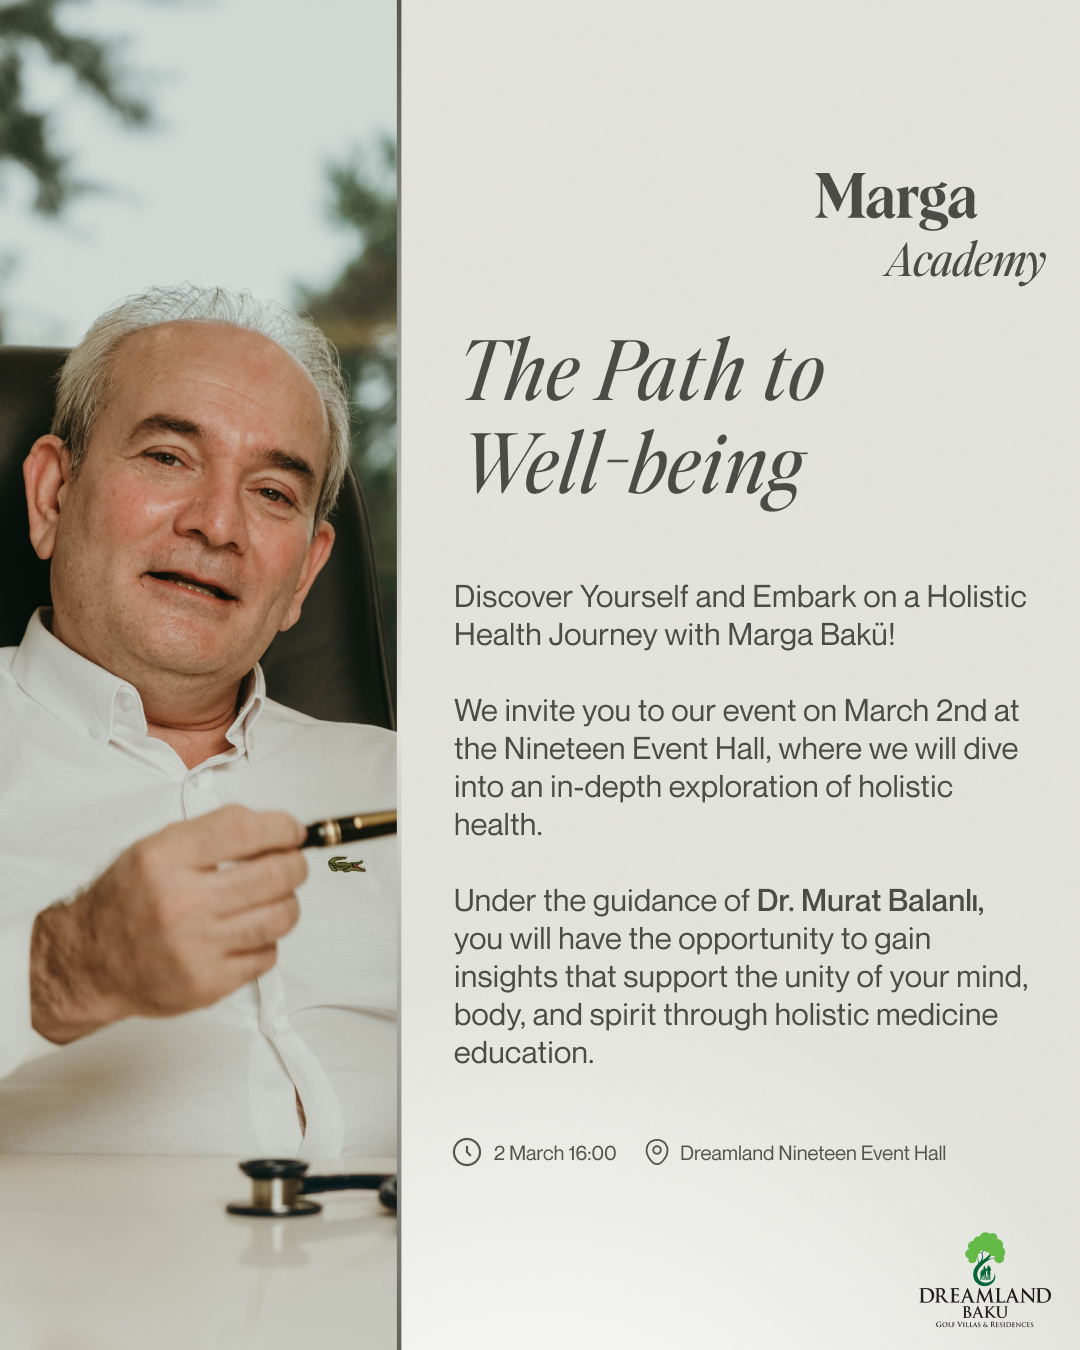 Discover Yourself and Embark on a Holistic Health Journey with Marga Baku!